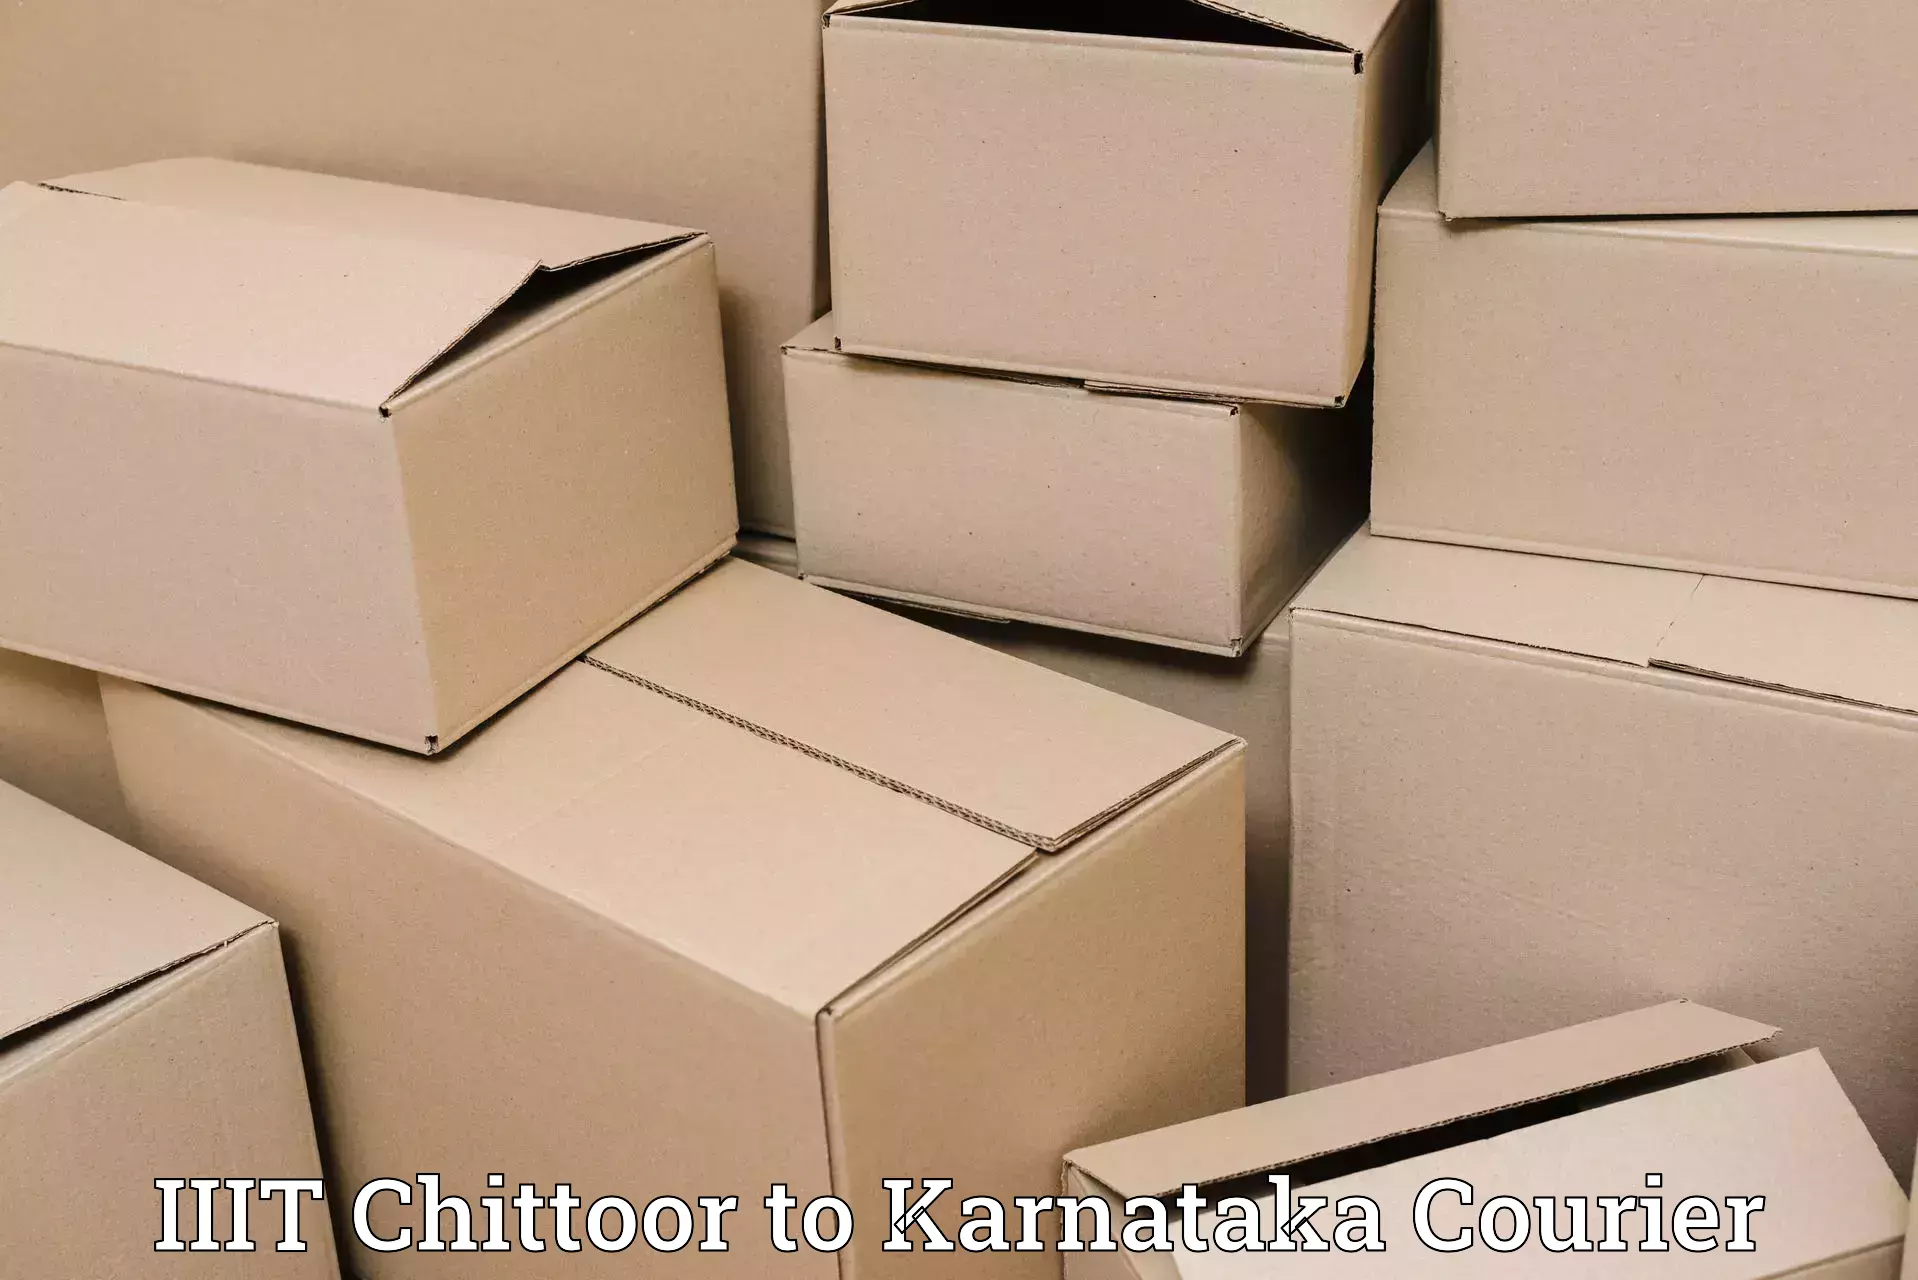 Expedited parcel delivery IIIT Chittoor to Ullal